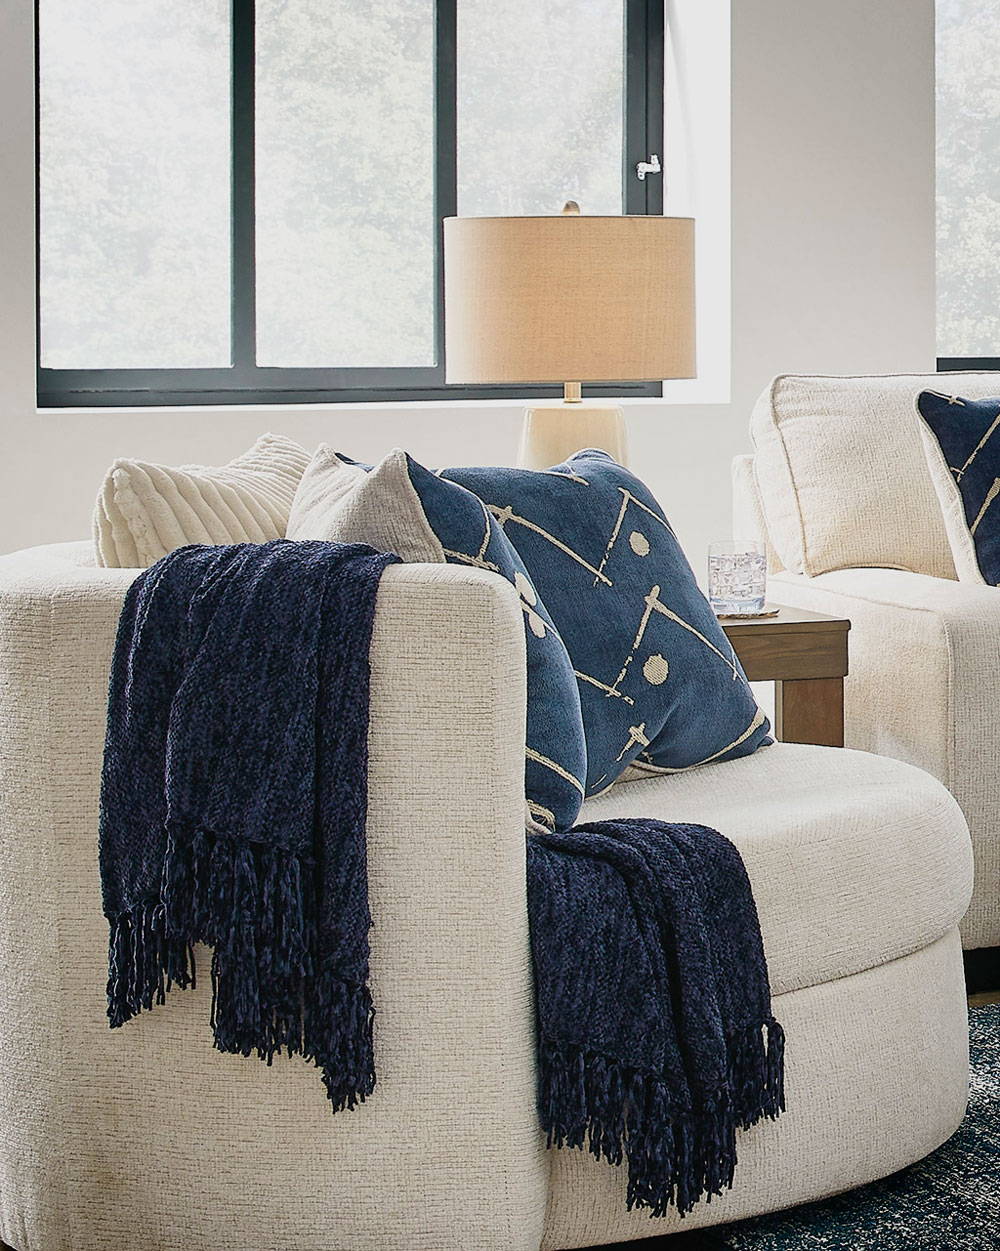 A Cozy Nook with blue throw pillows and a throw blanket